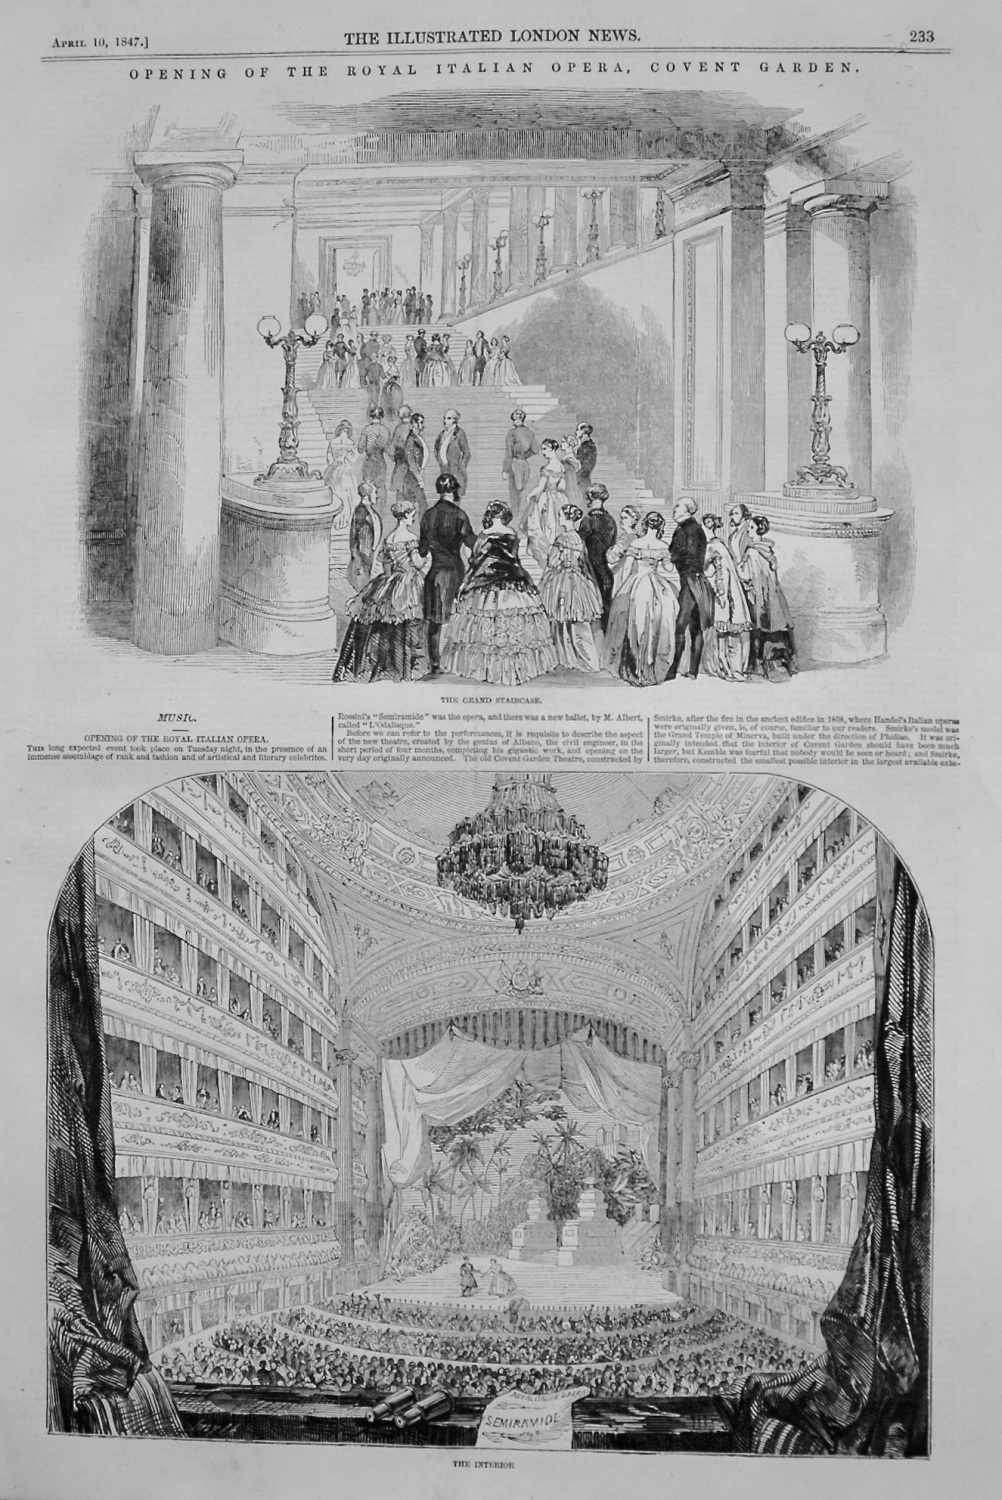 Opening of the Royal Italian Opera, Covent Garden. 1847